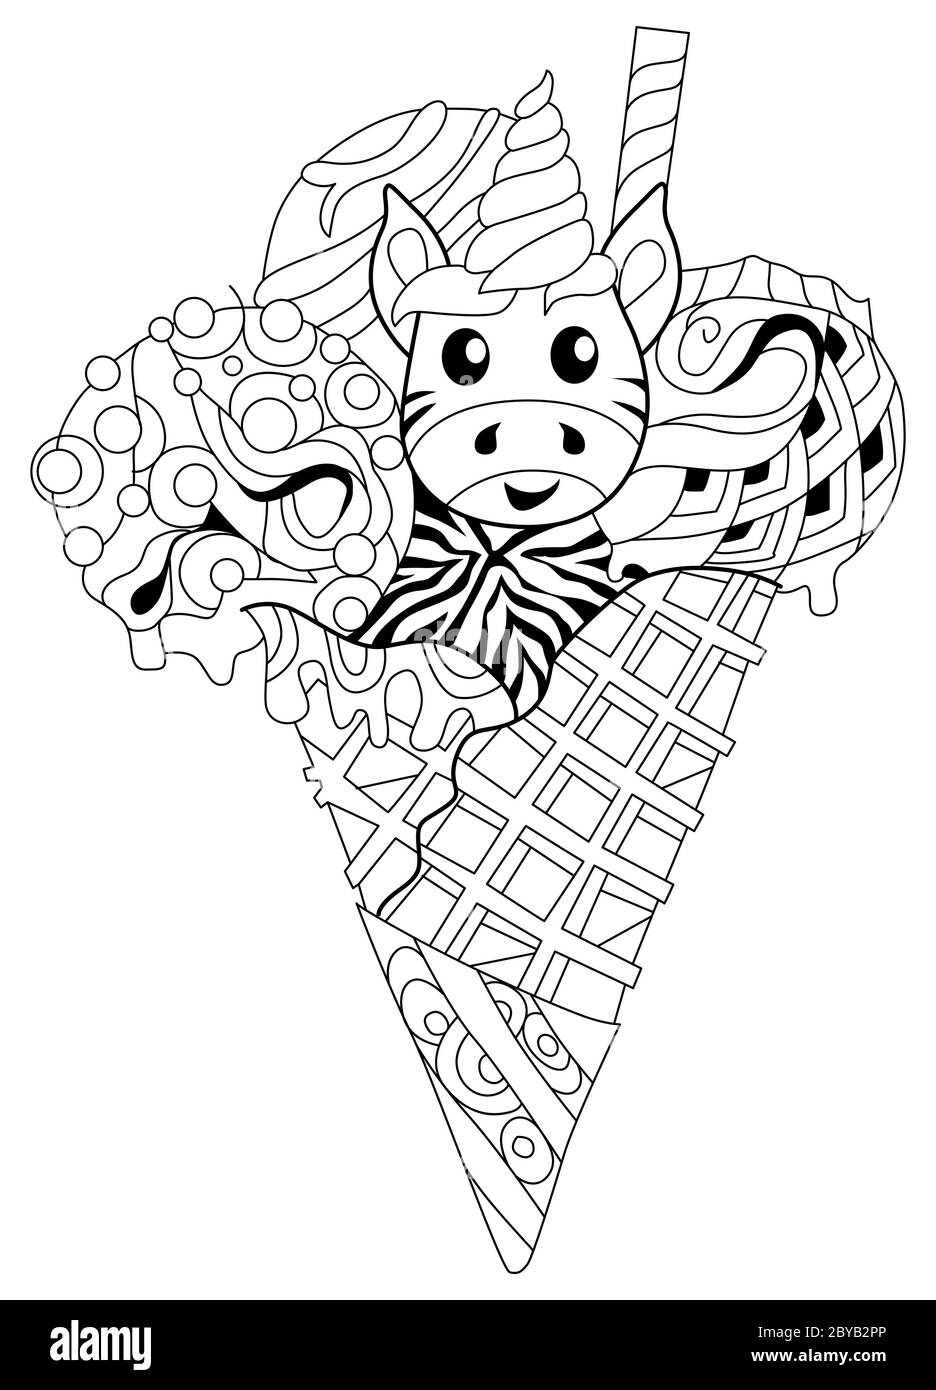 Ice cream with unicorn head. Drawn in black and white outline for ...